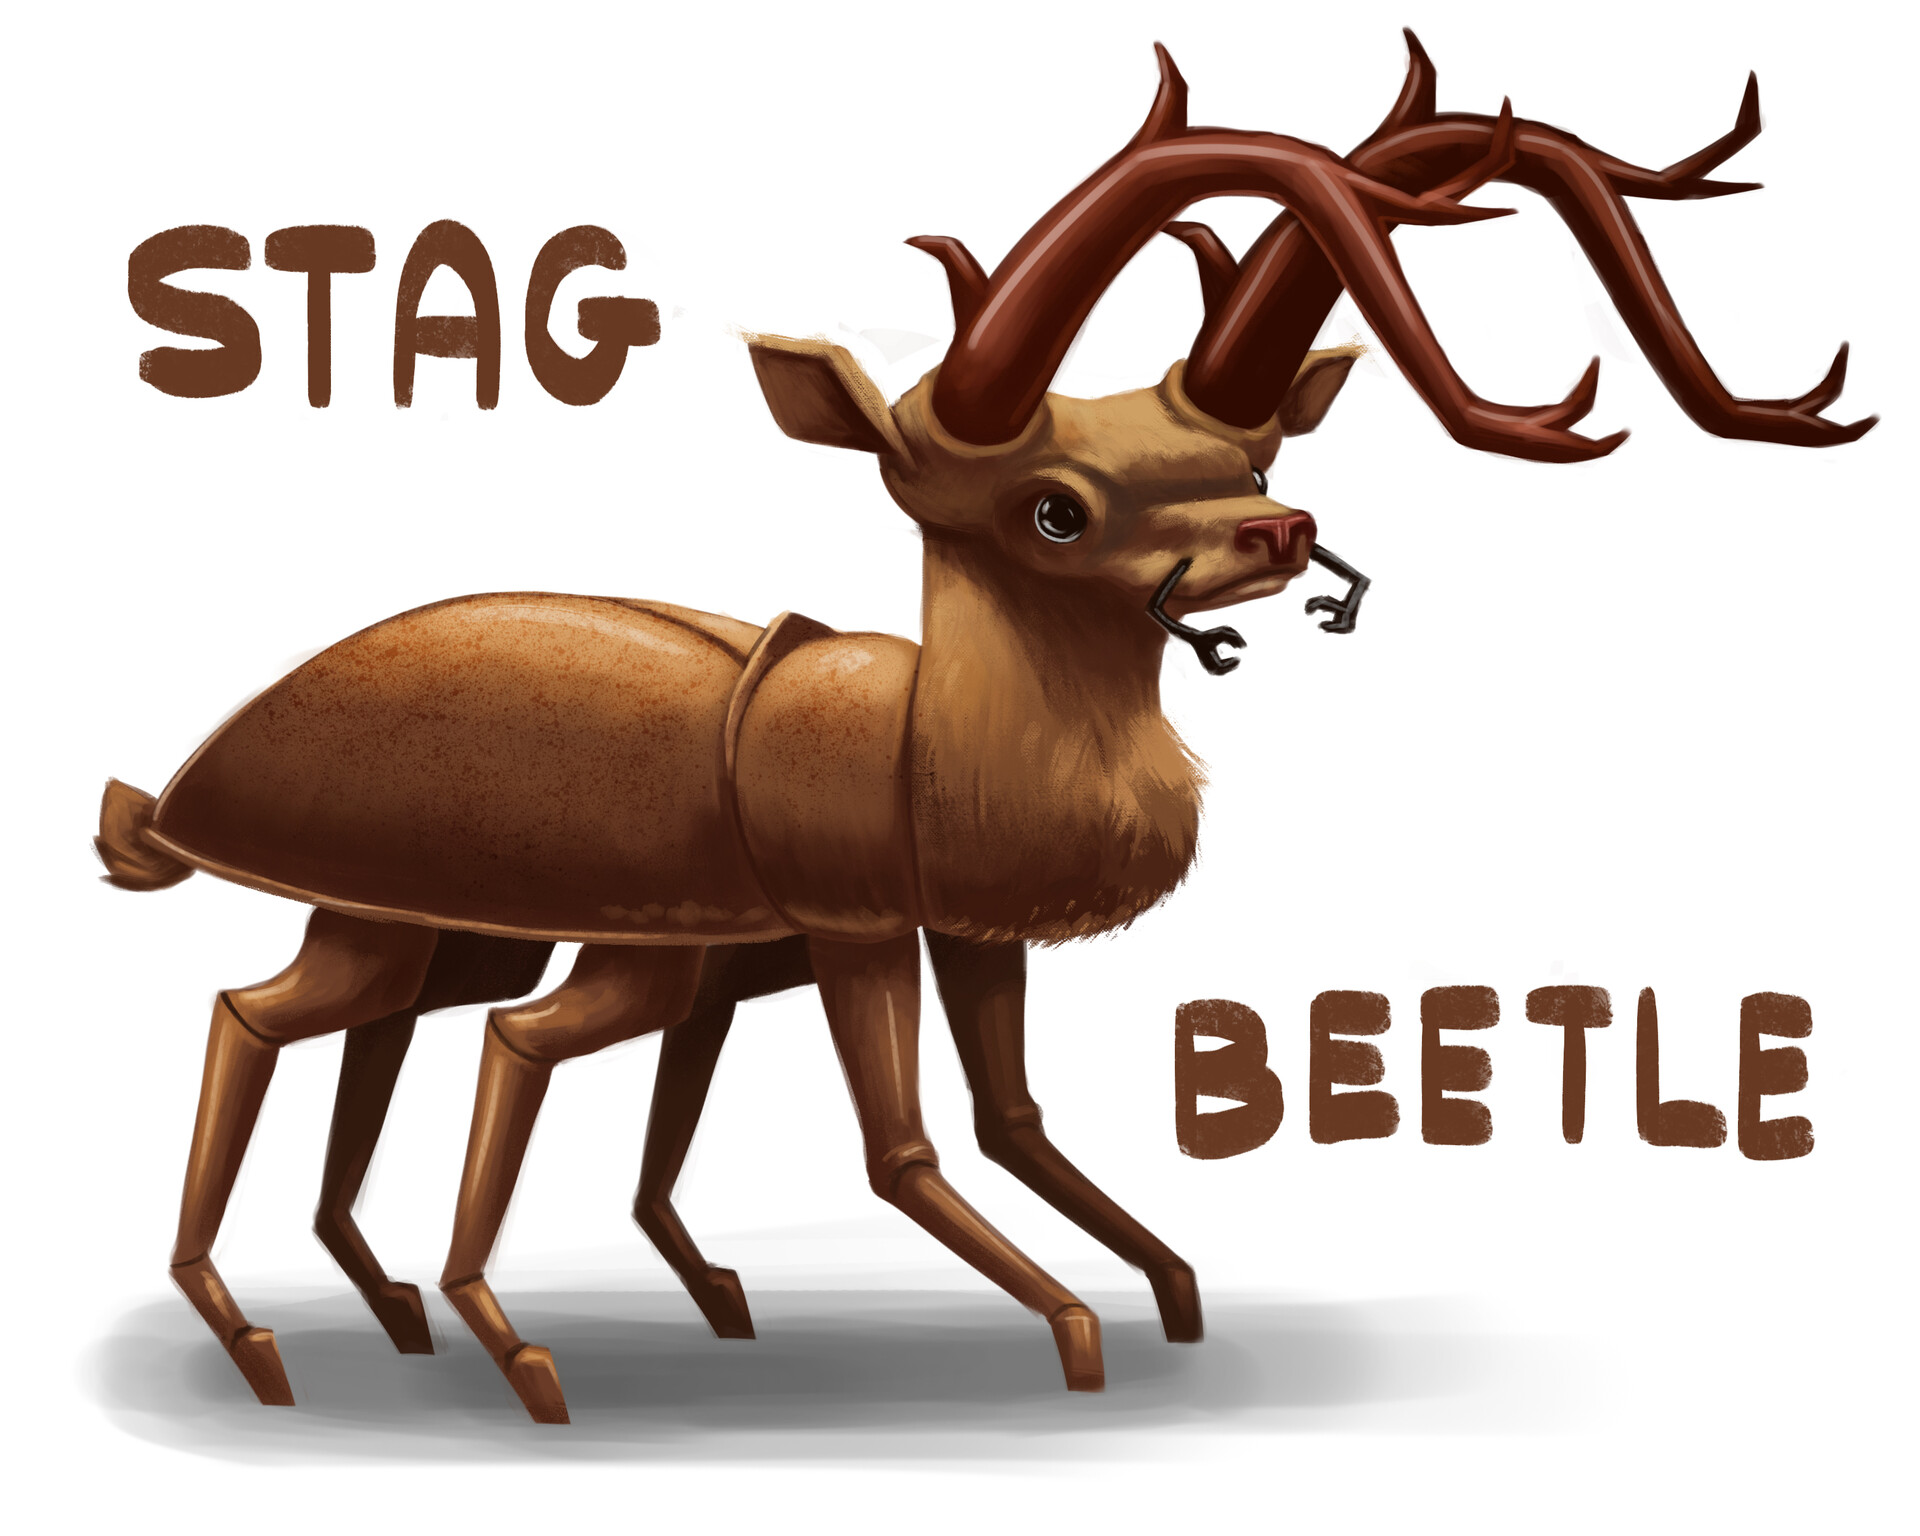 Stag Beetle. Stag реклама. King Stag Beetle. Stag Beetle furry.